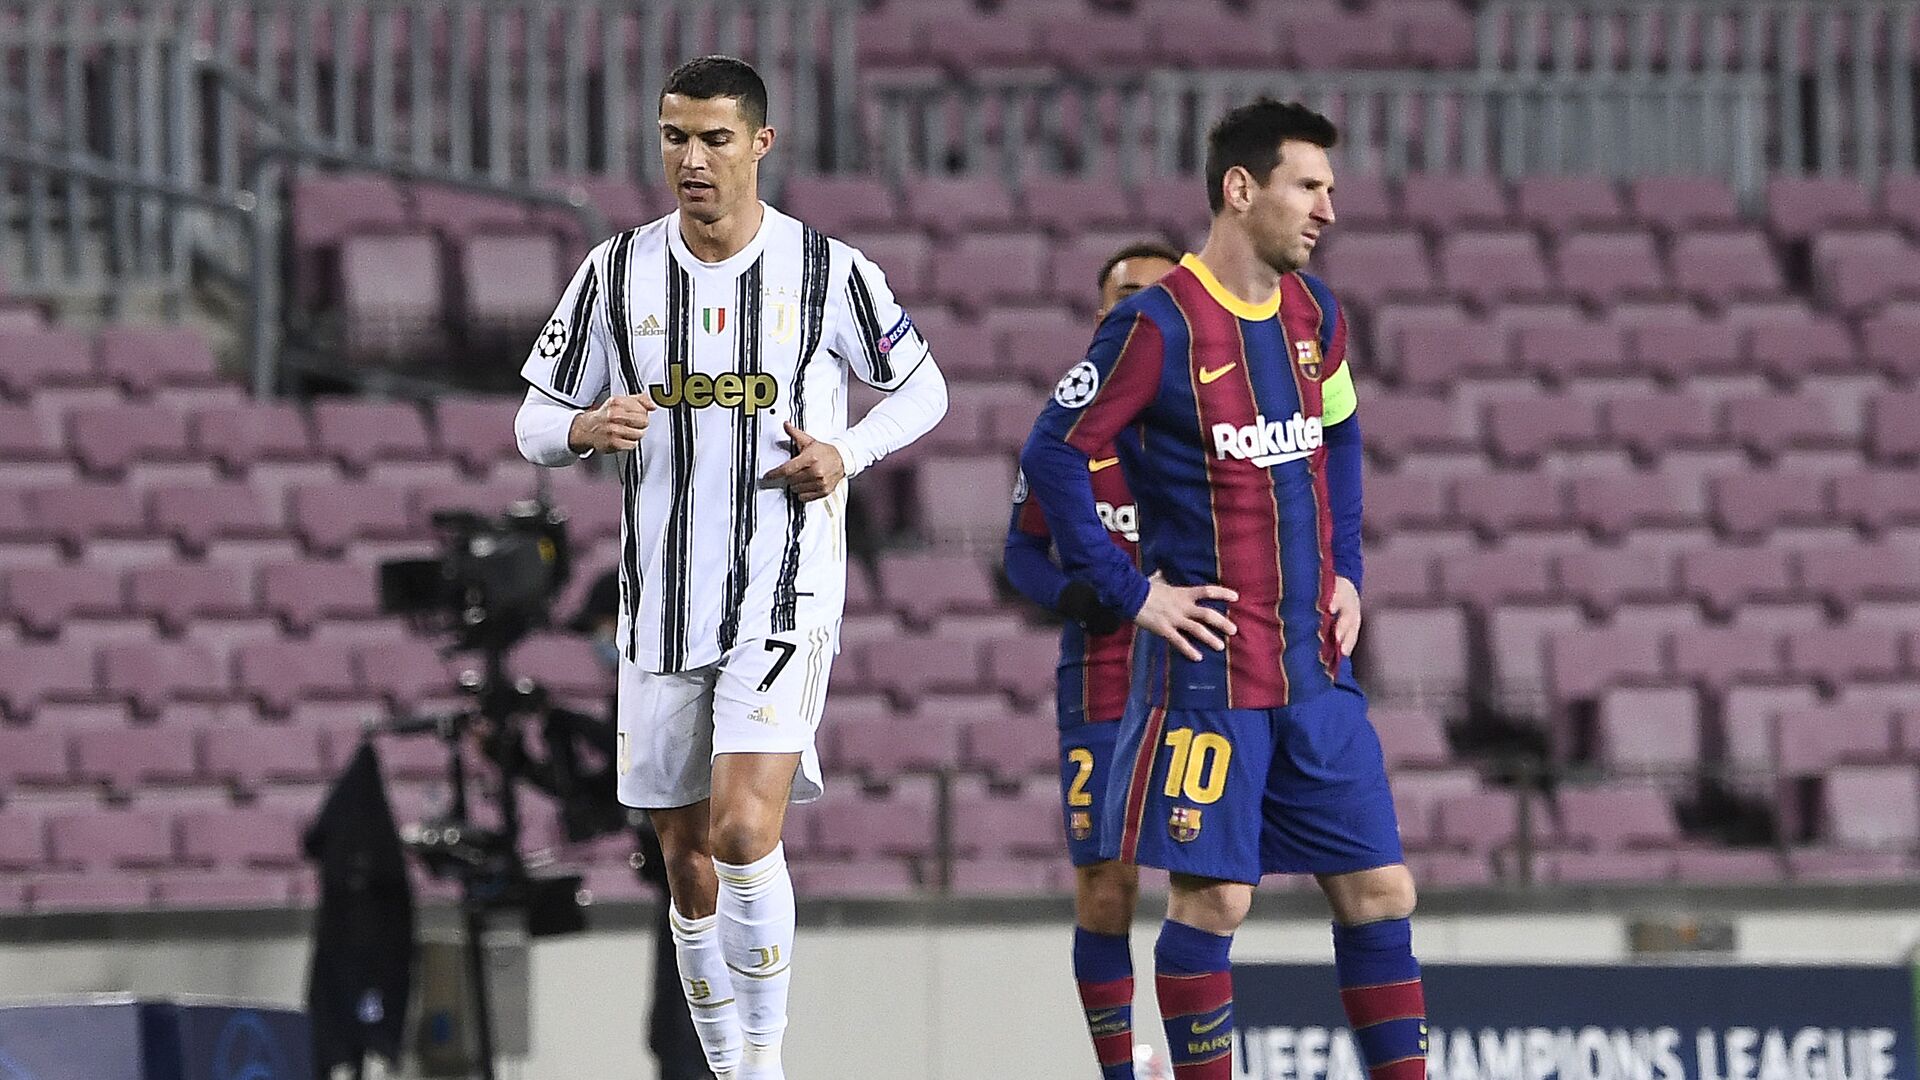 Juventus' Portuguese forward Cristiano Ronaldo (L) walks past Barcelona's Argentinian forward Lionel Messi during the UEFA Champions League group G football match between Barcelona and Juventus at the Camp Nou stadium in Barcelona on December 8, 2020 - Sputnik International, 1920, 29.03.2022